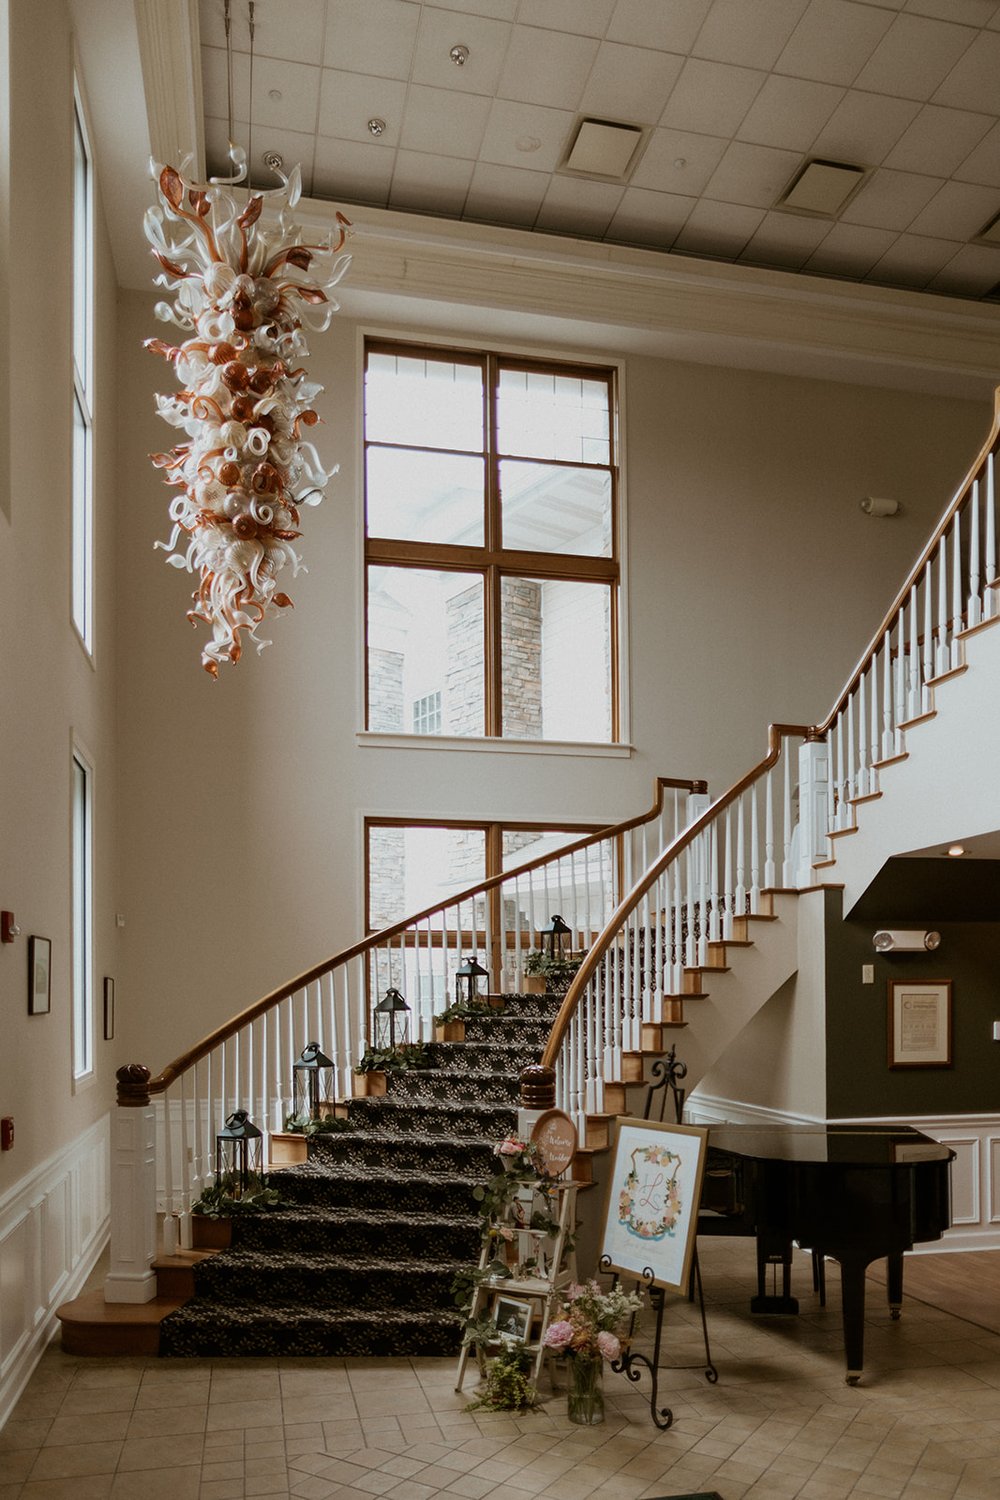 Entry way of the Corning Country club with beautiful glass sculpture hanging from the ceiling and staircase. 